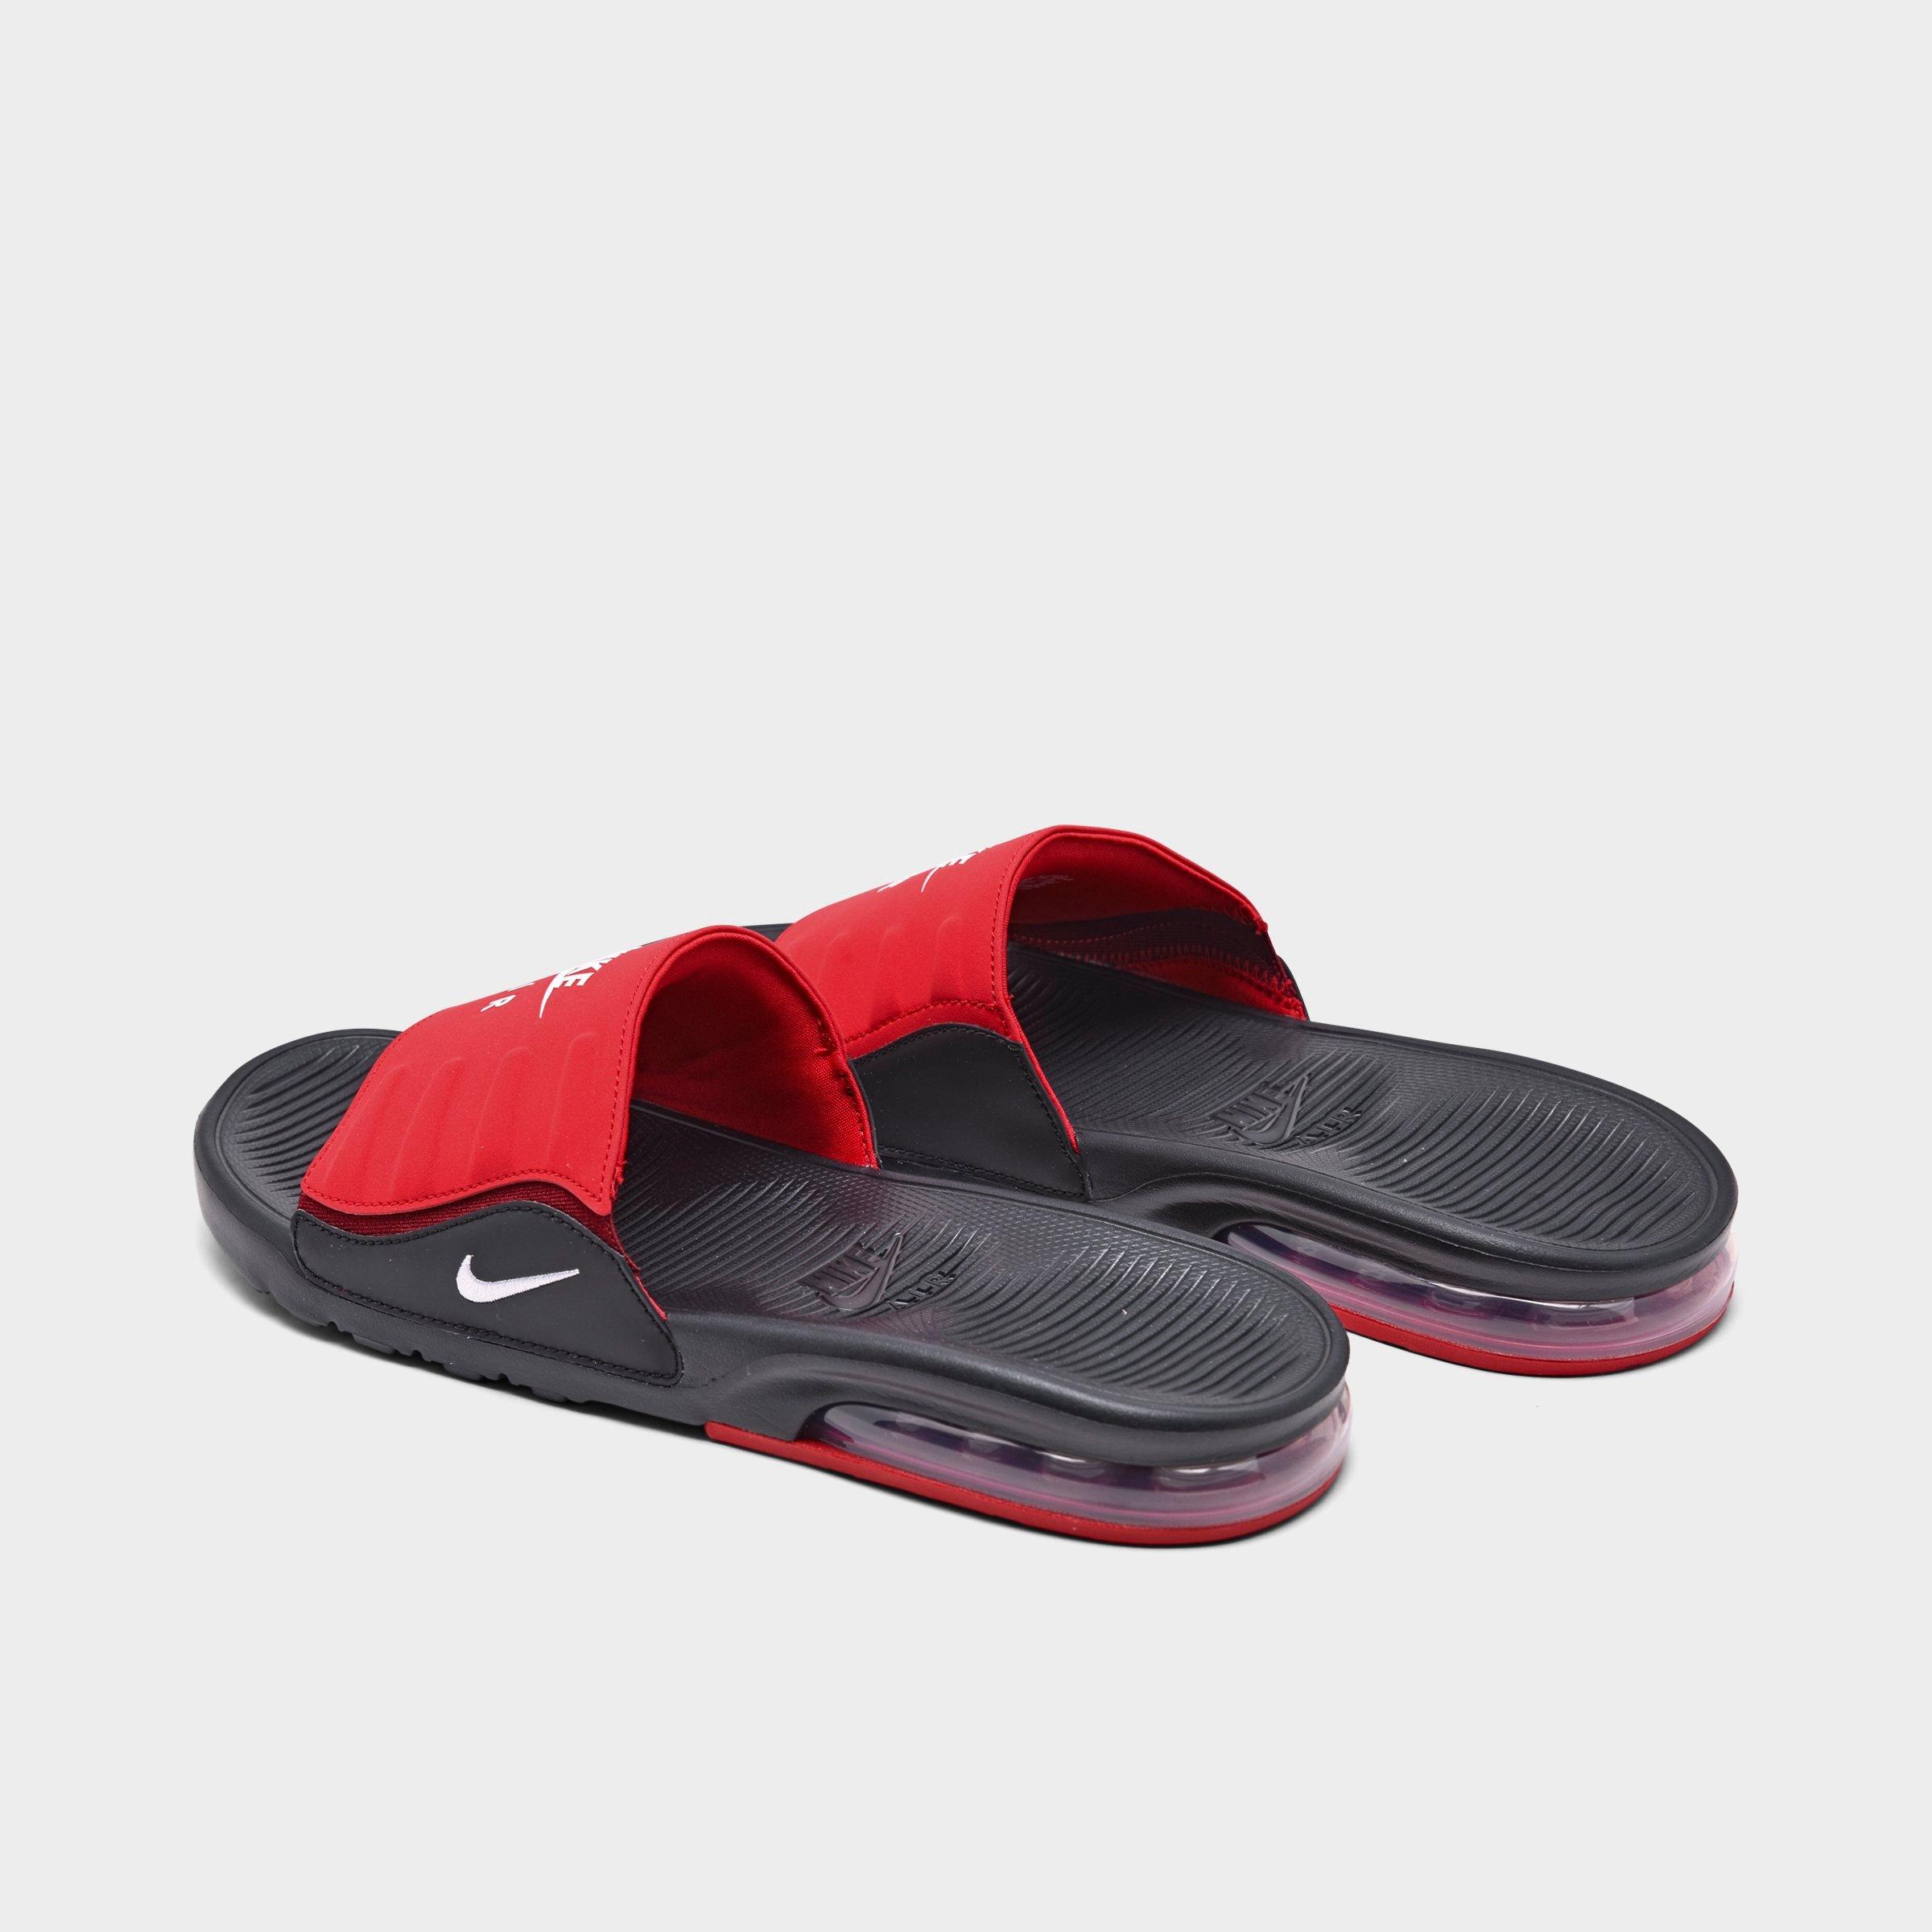 nike slippers with air bubble